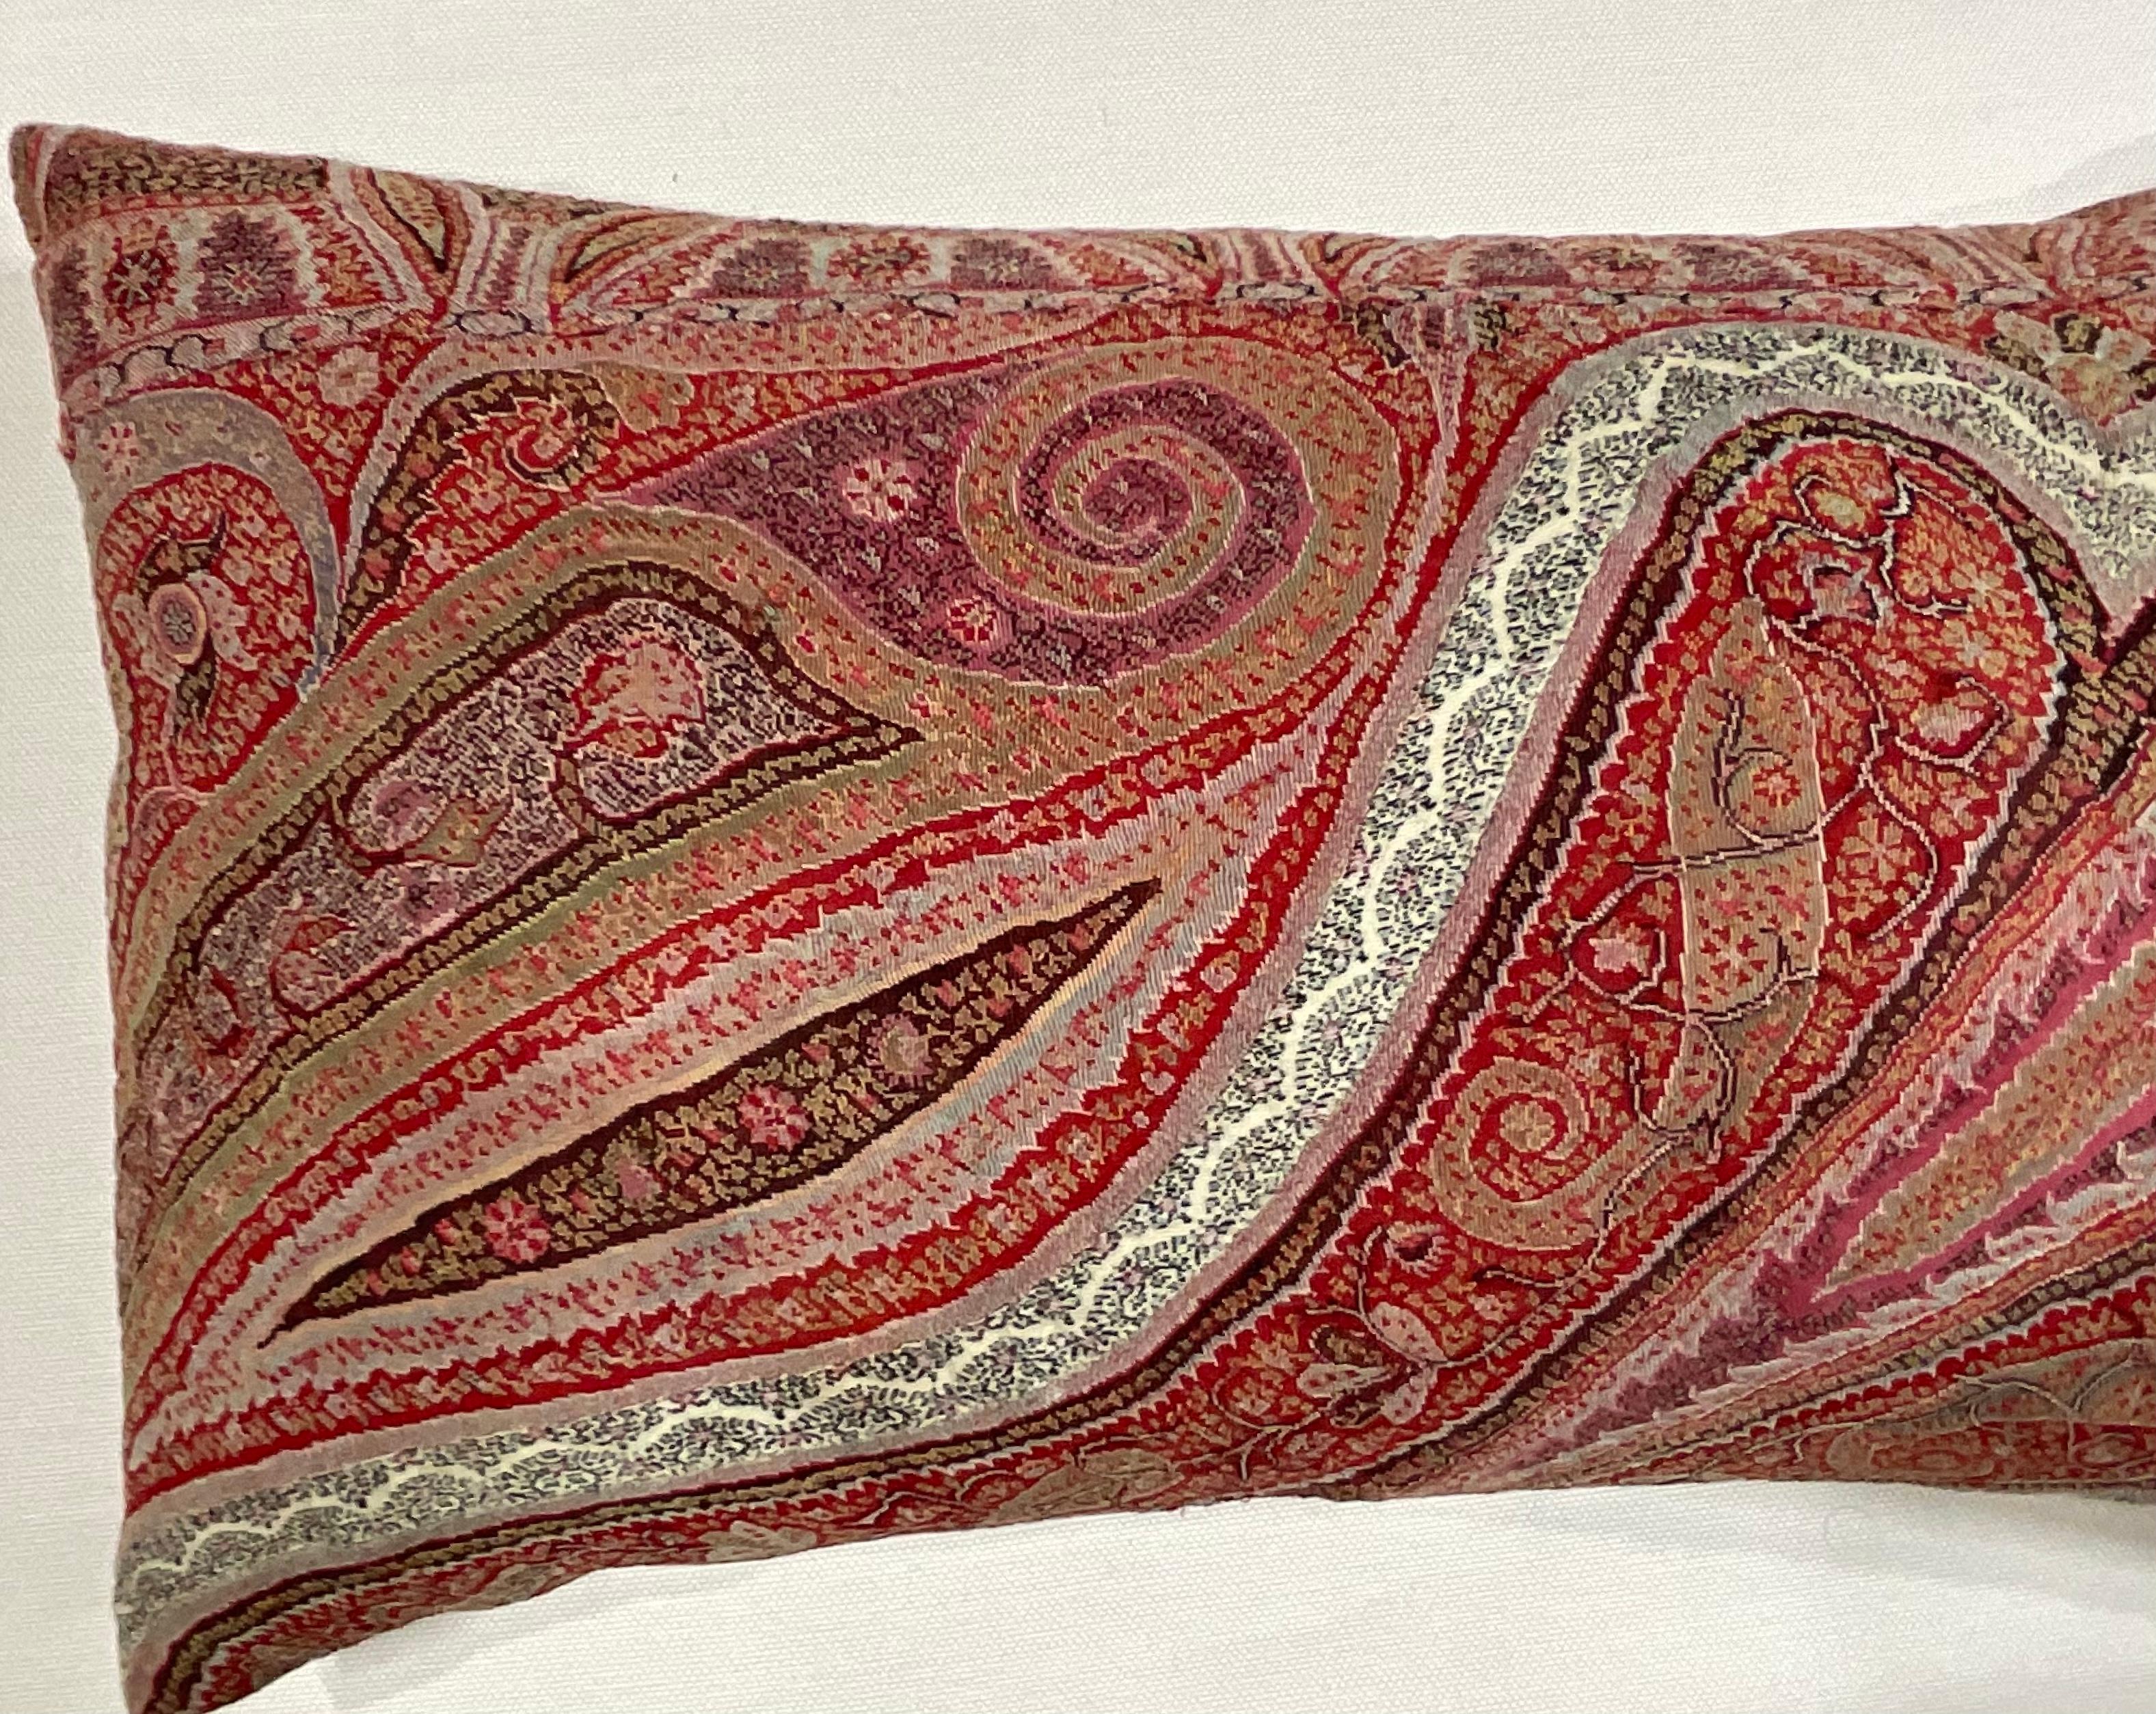 Embroidered Single Antique Pillow Made from Kashmir Shawl